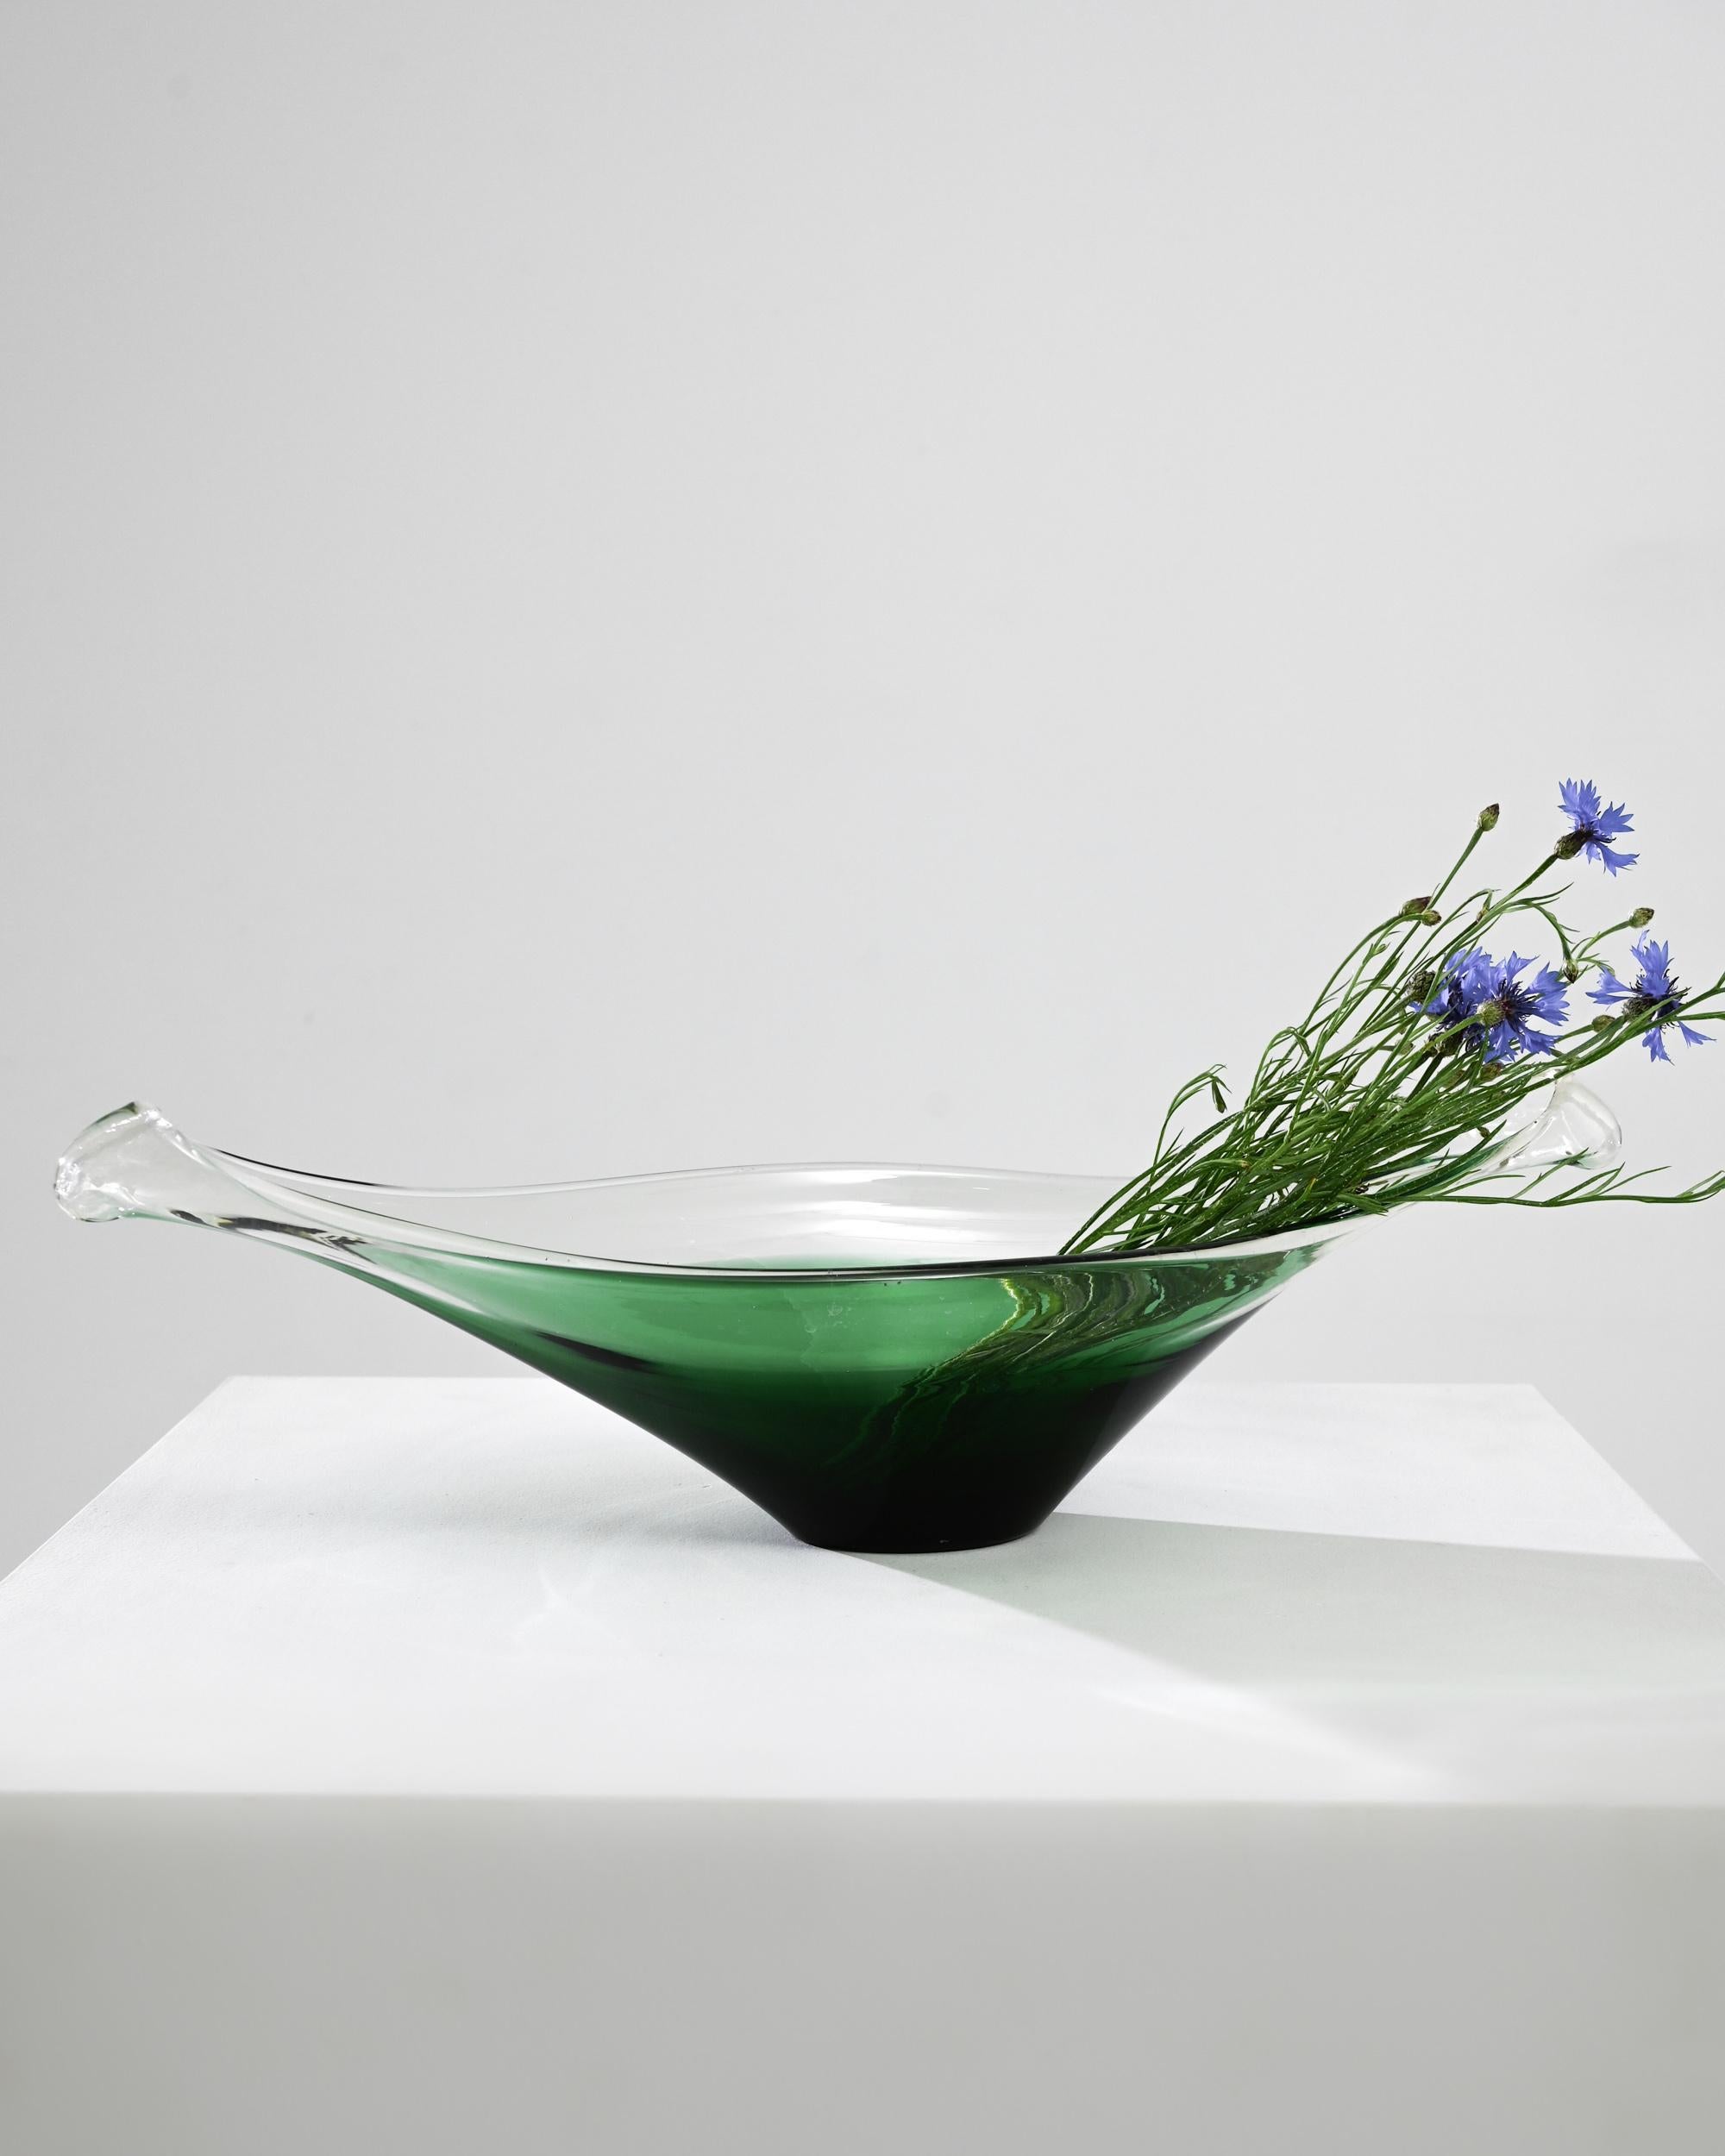 The liquid lines of this glass plateau make for an elegant decorative accent. Made in Belgium in the 20th Century, the mastery required to make this artisan glasswork is visible in the elongated symmetry of the form and the skillful color gradient,